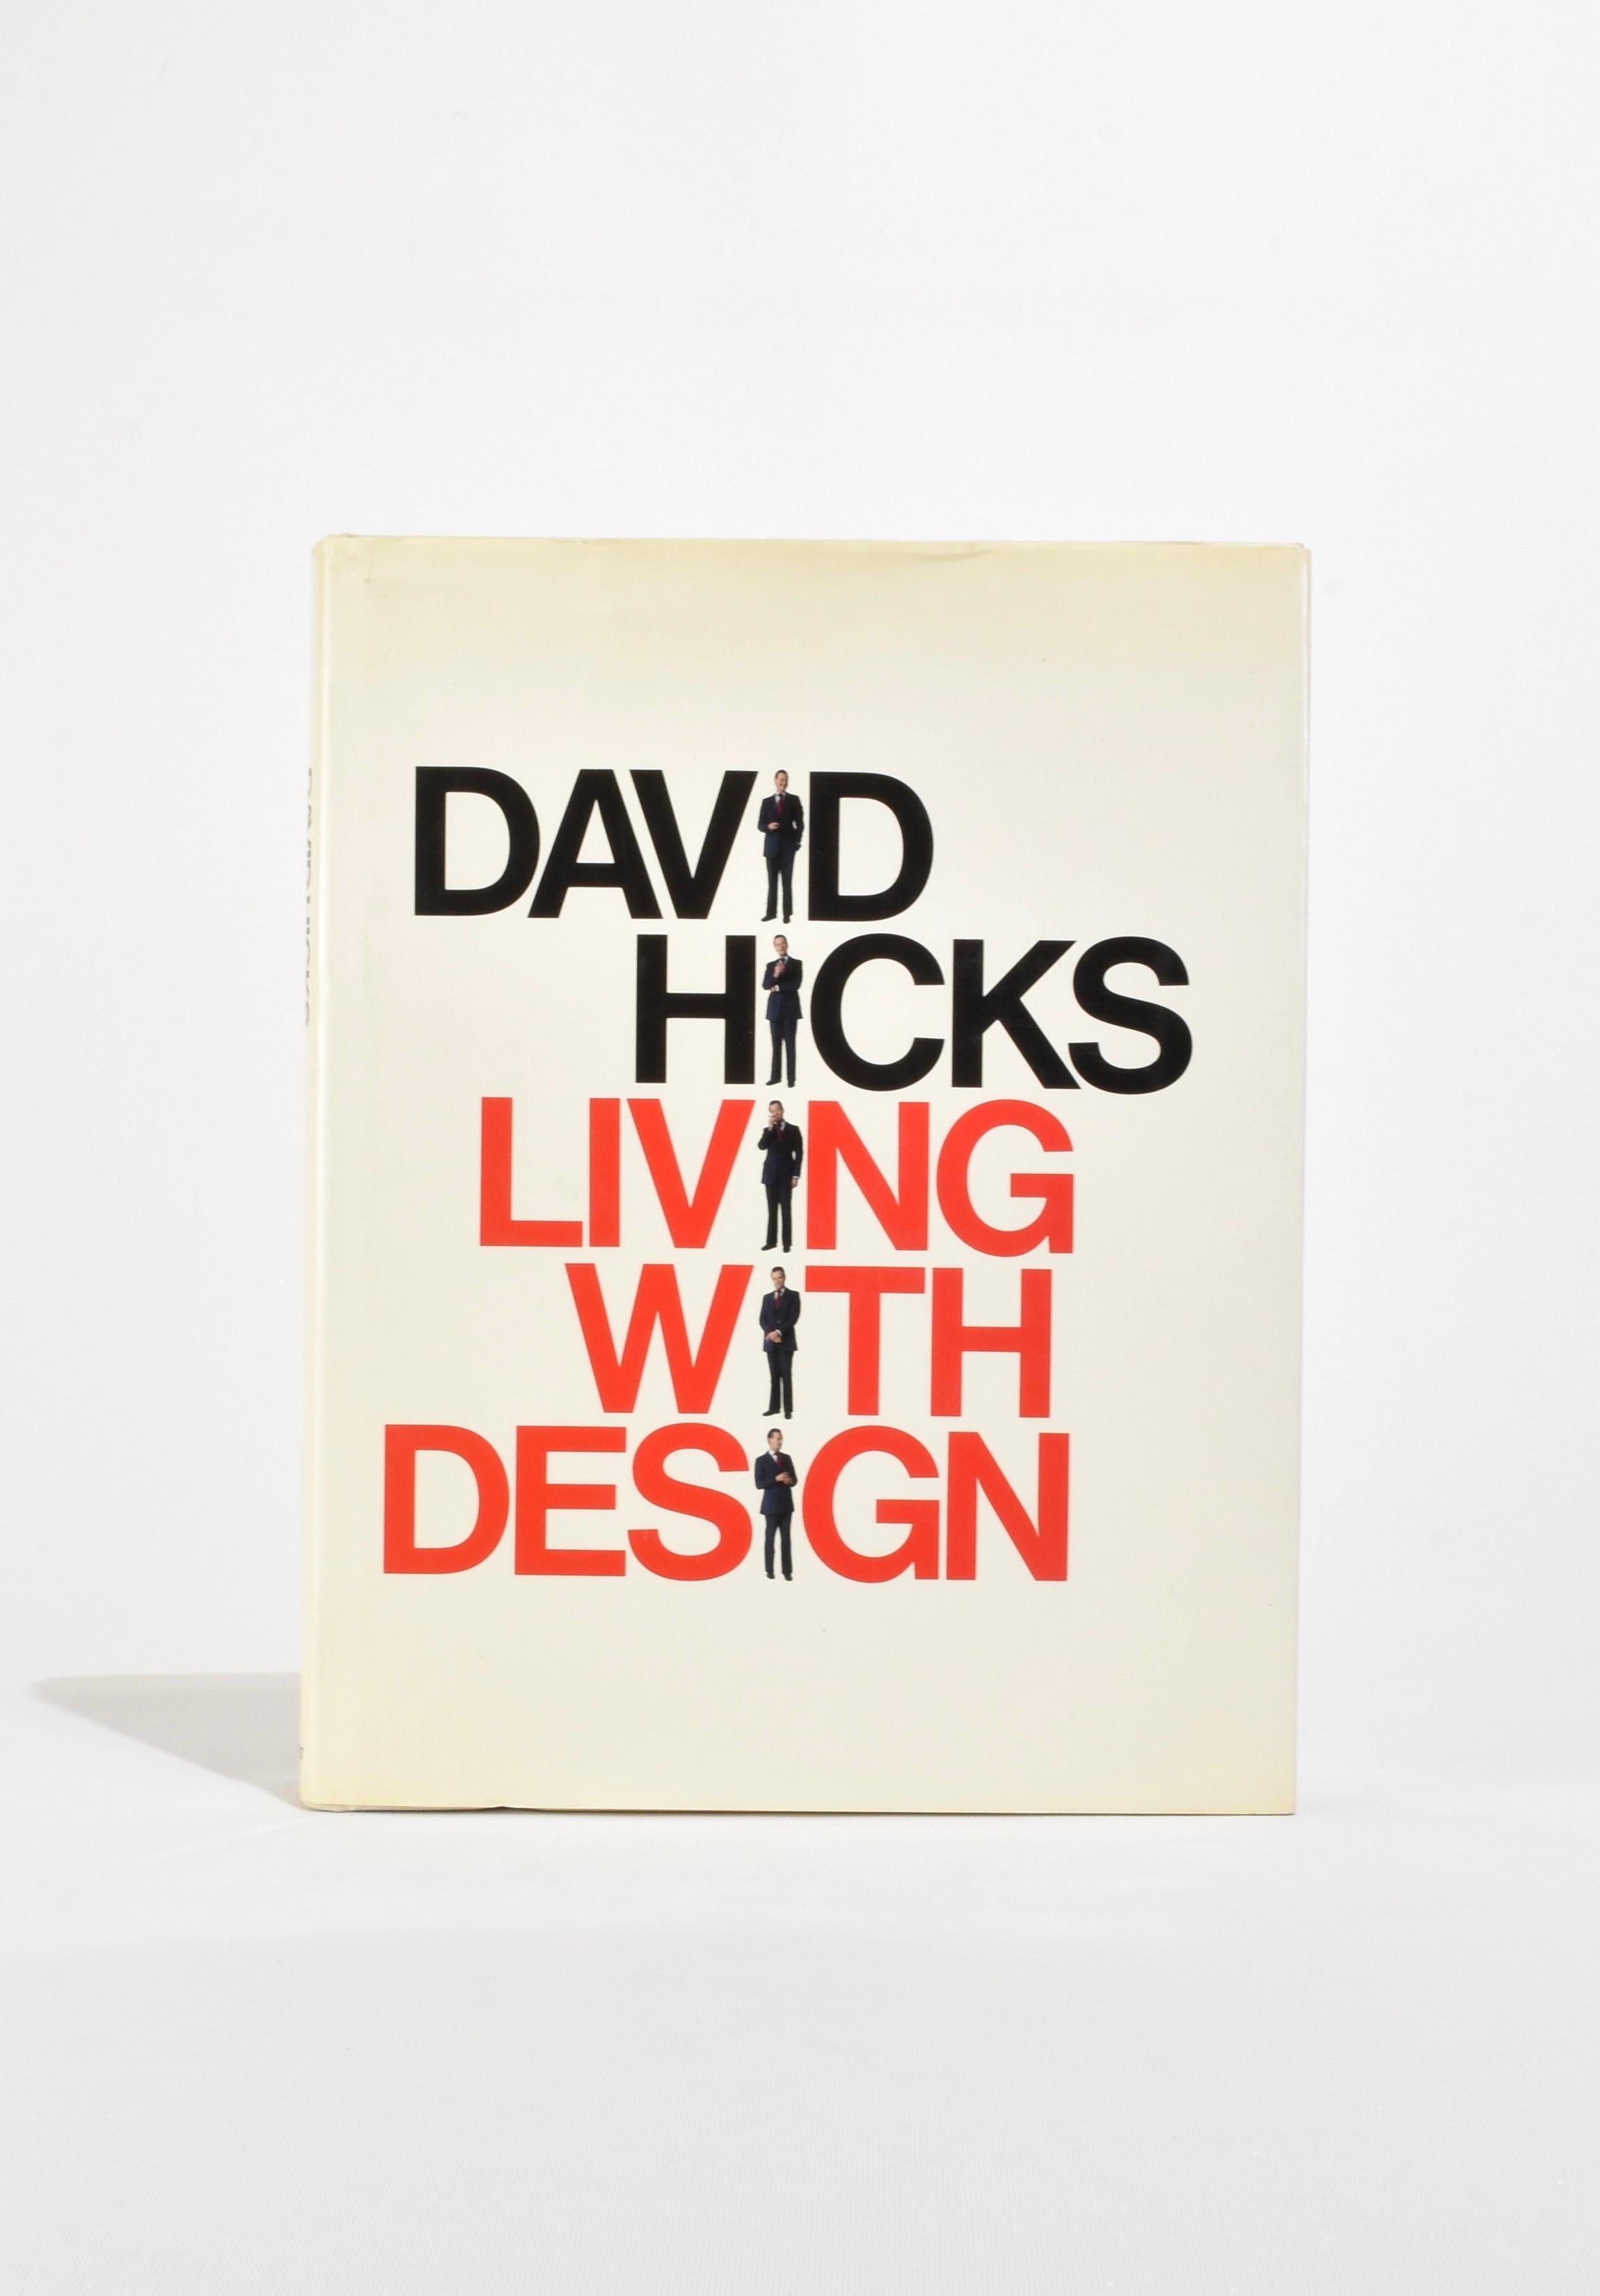 Vintage hardback coffee table book featuring the work of renowned interior designer, David Hicks. By David Hicks, published in 1979. First edition, 287 pages.

